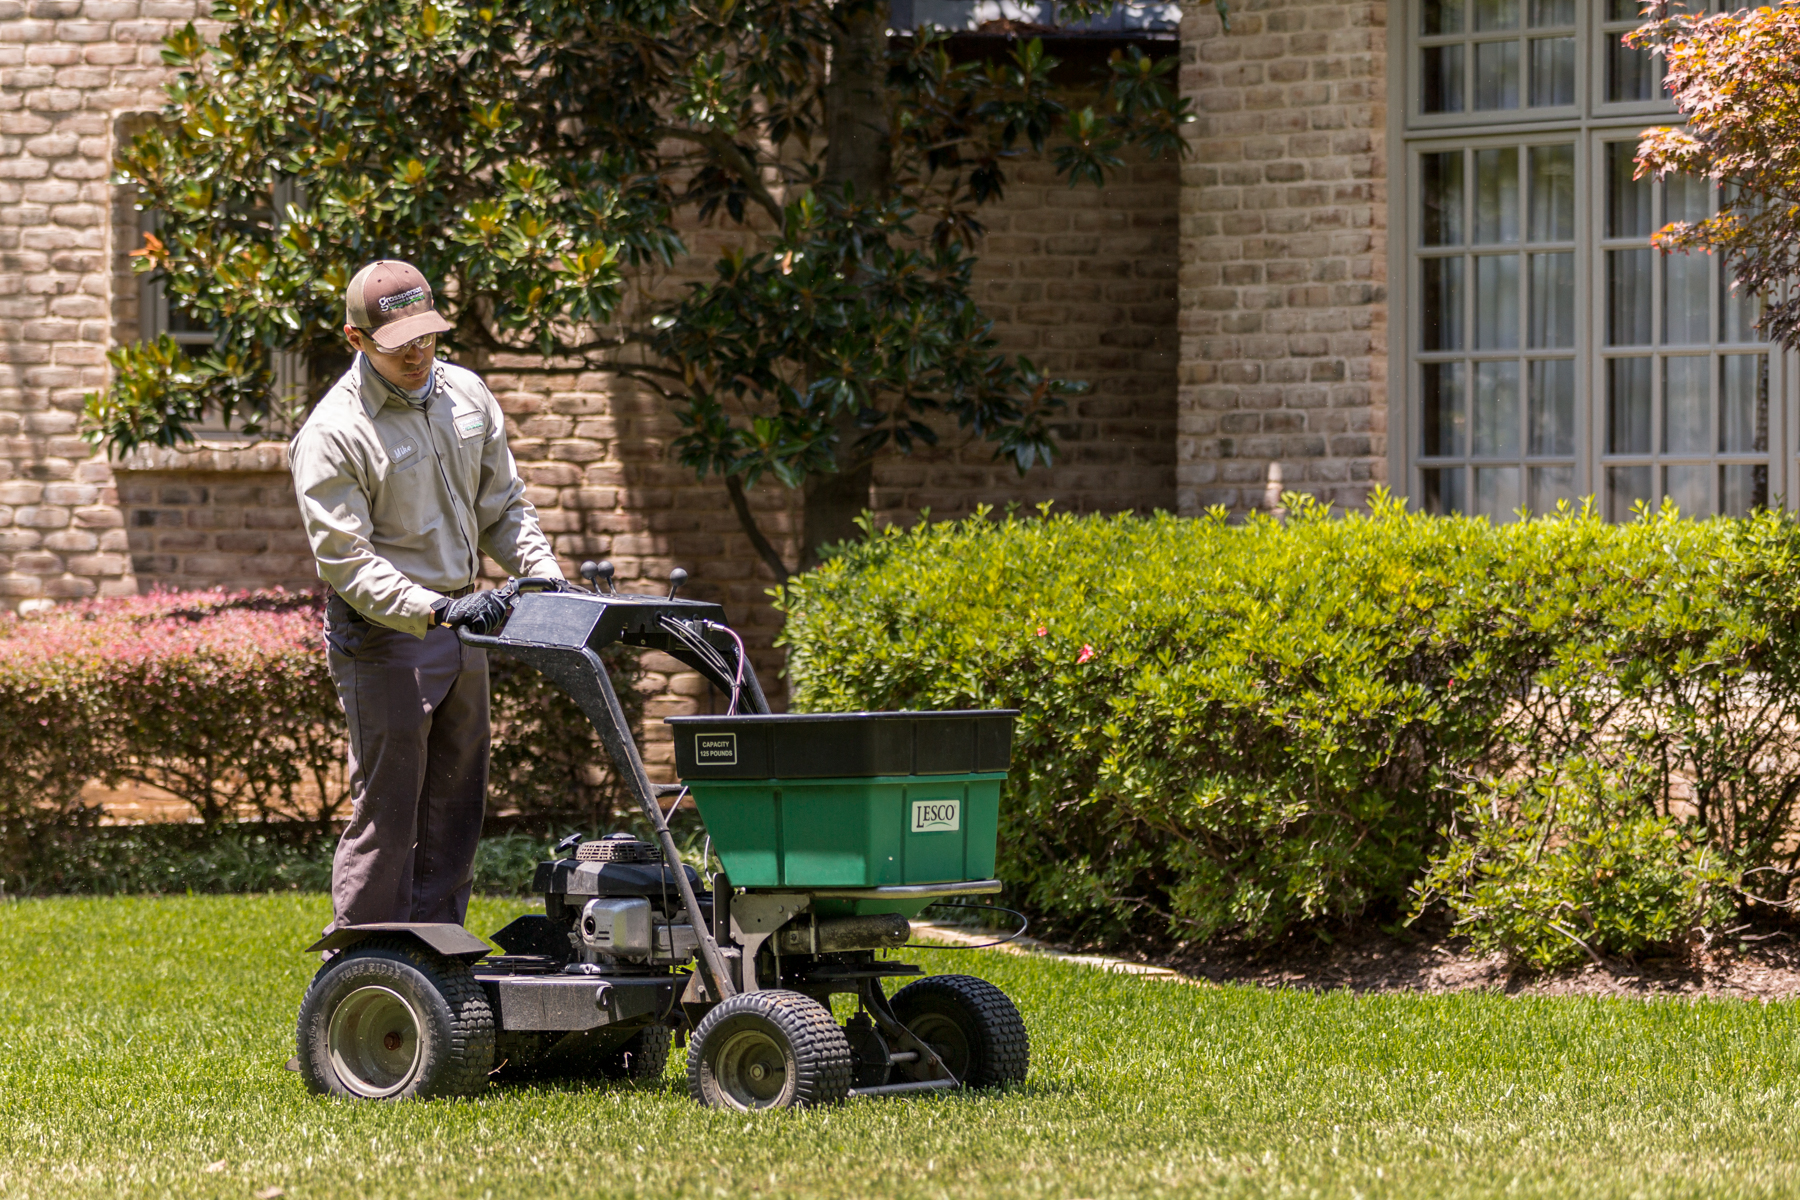 How Long Does it Take For Lawn Treatments to Work? Weed Control, Fertilizer, & More